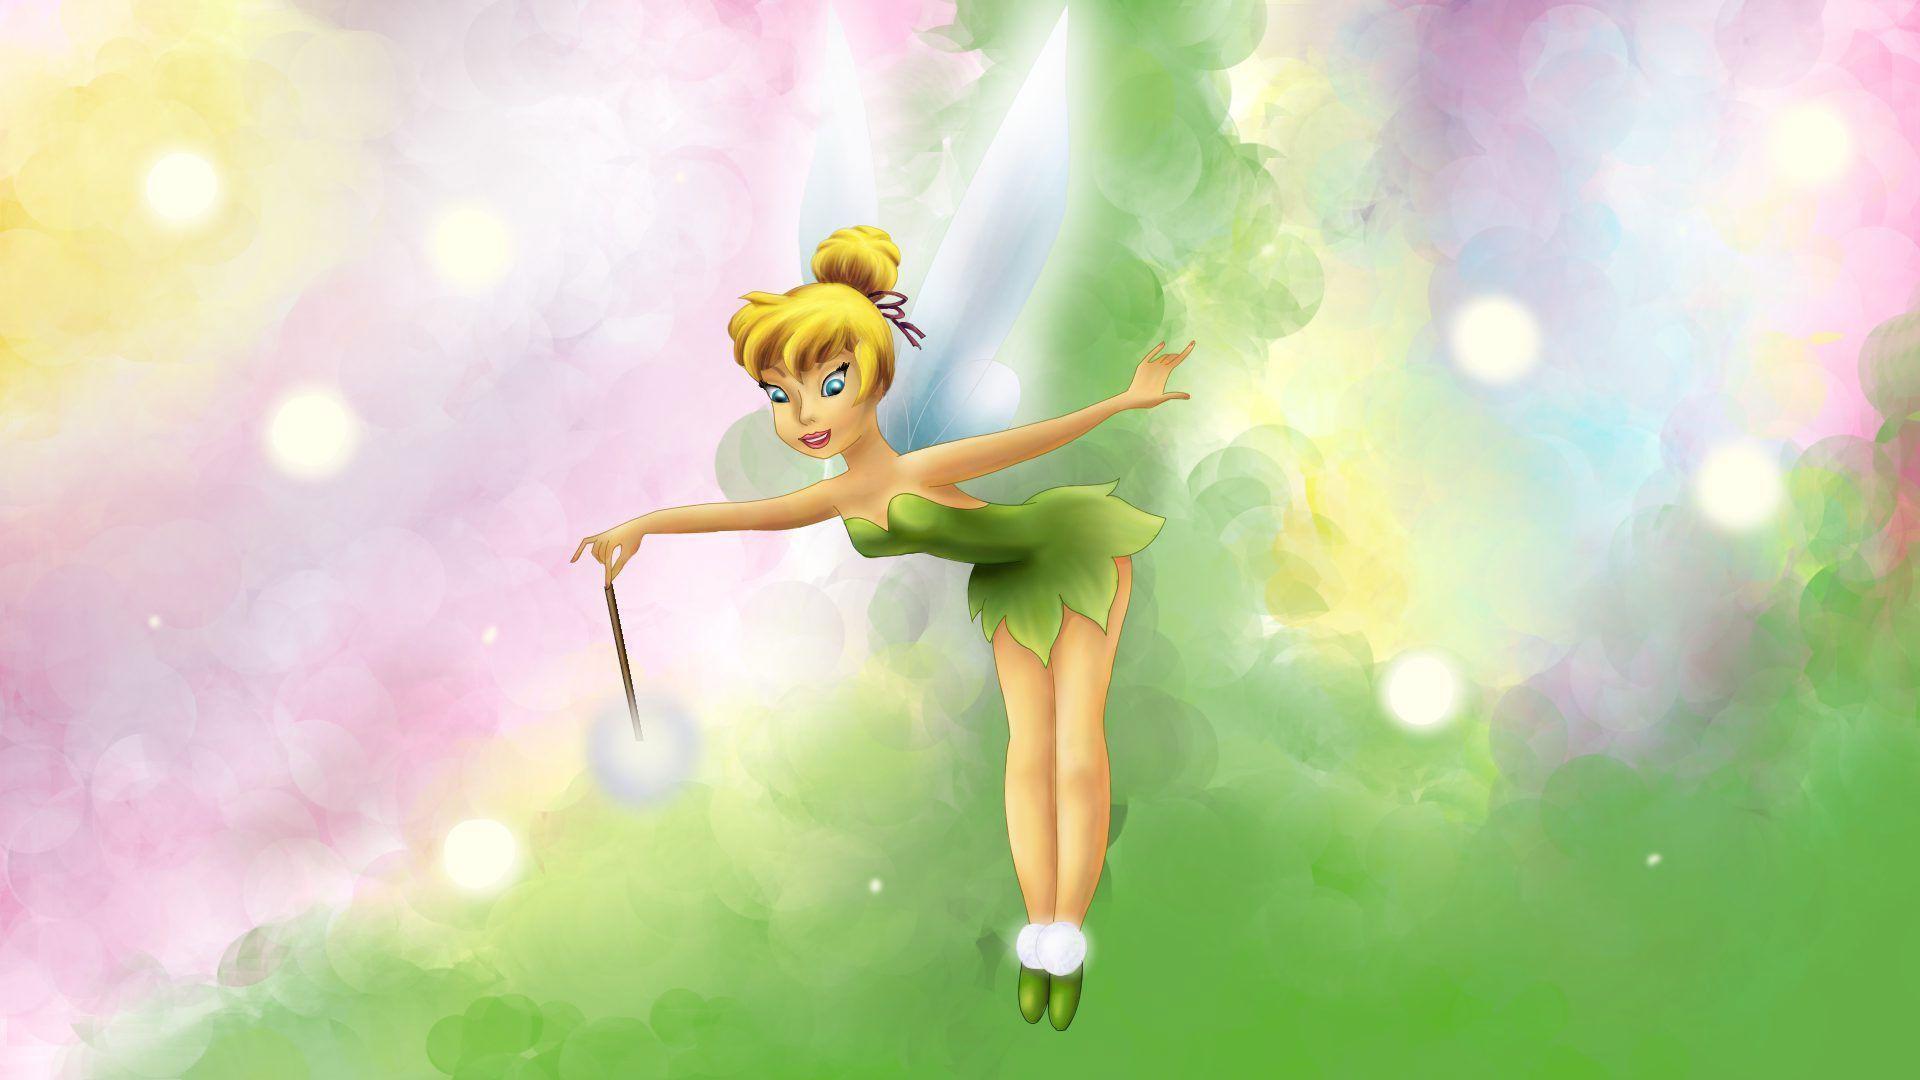 tinkerbell images free download